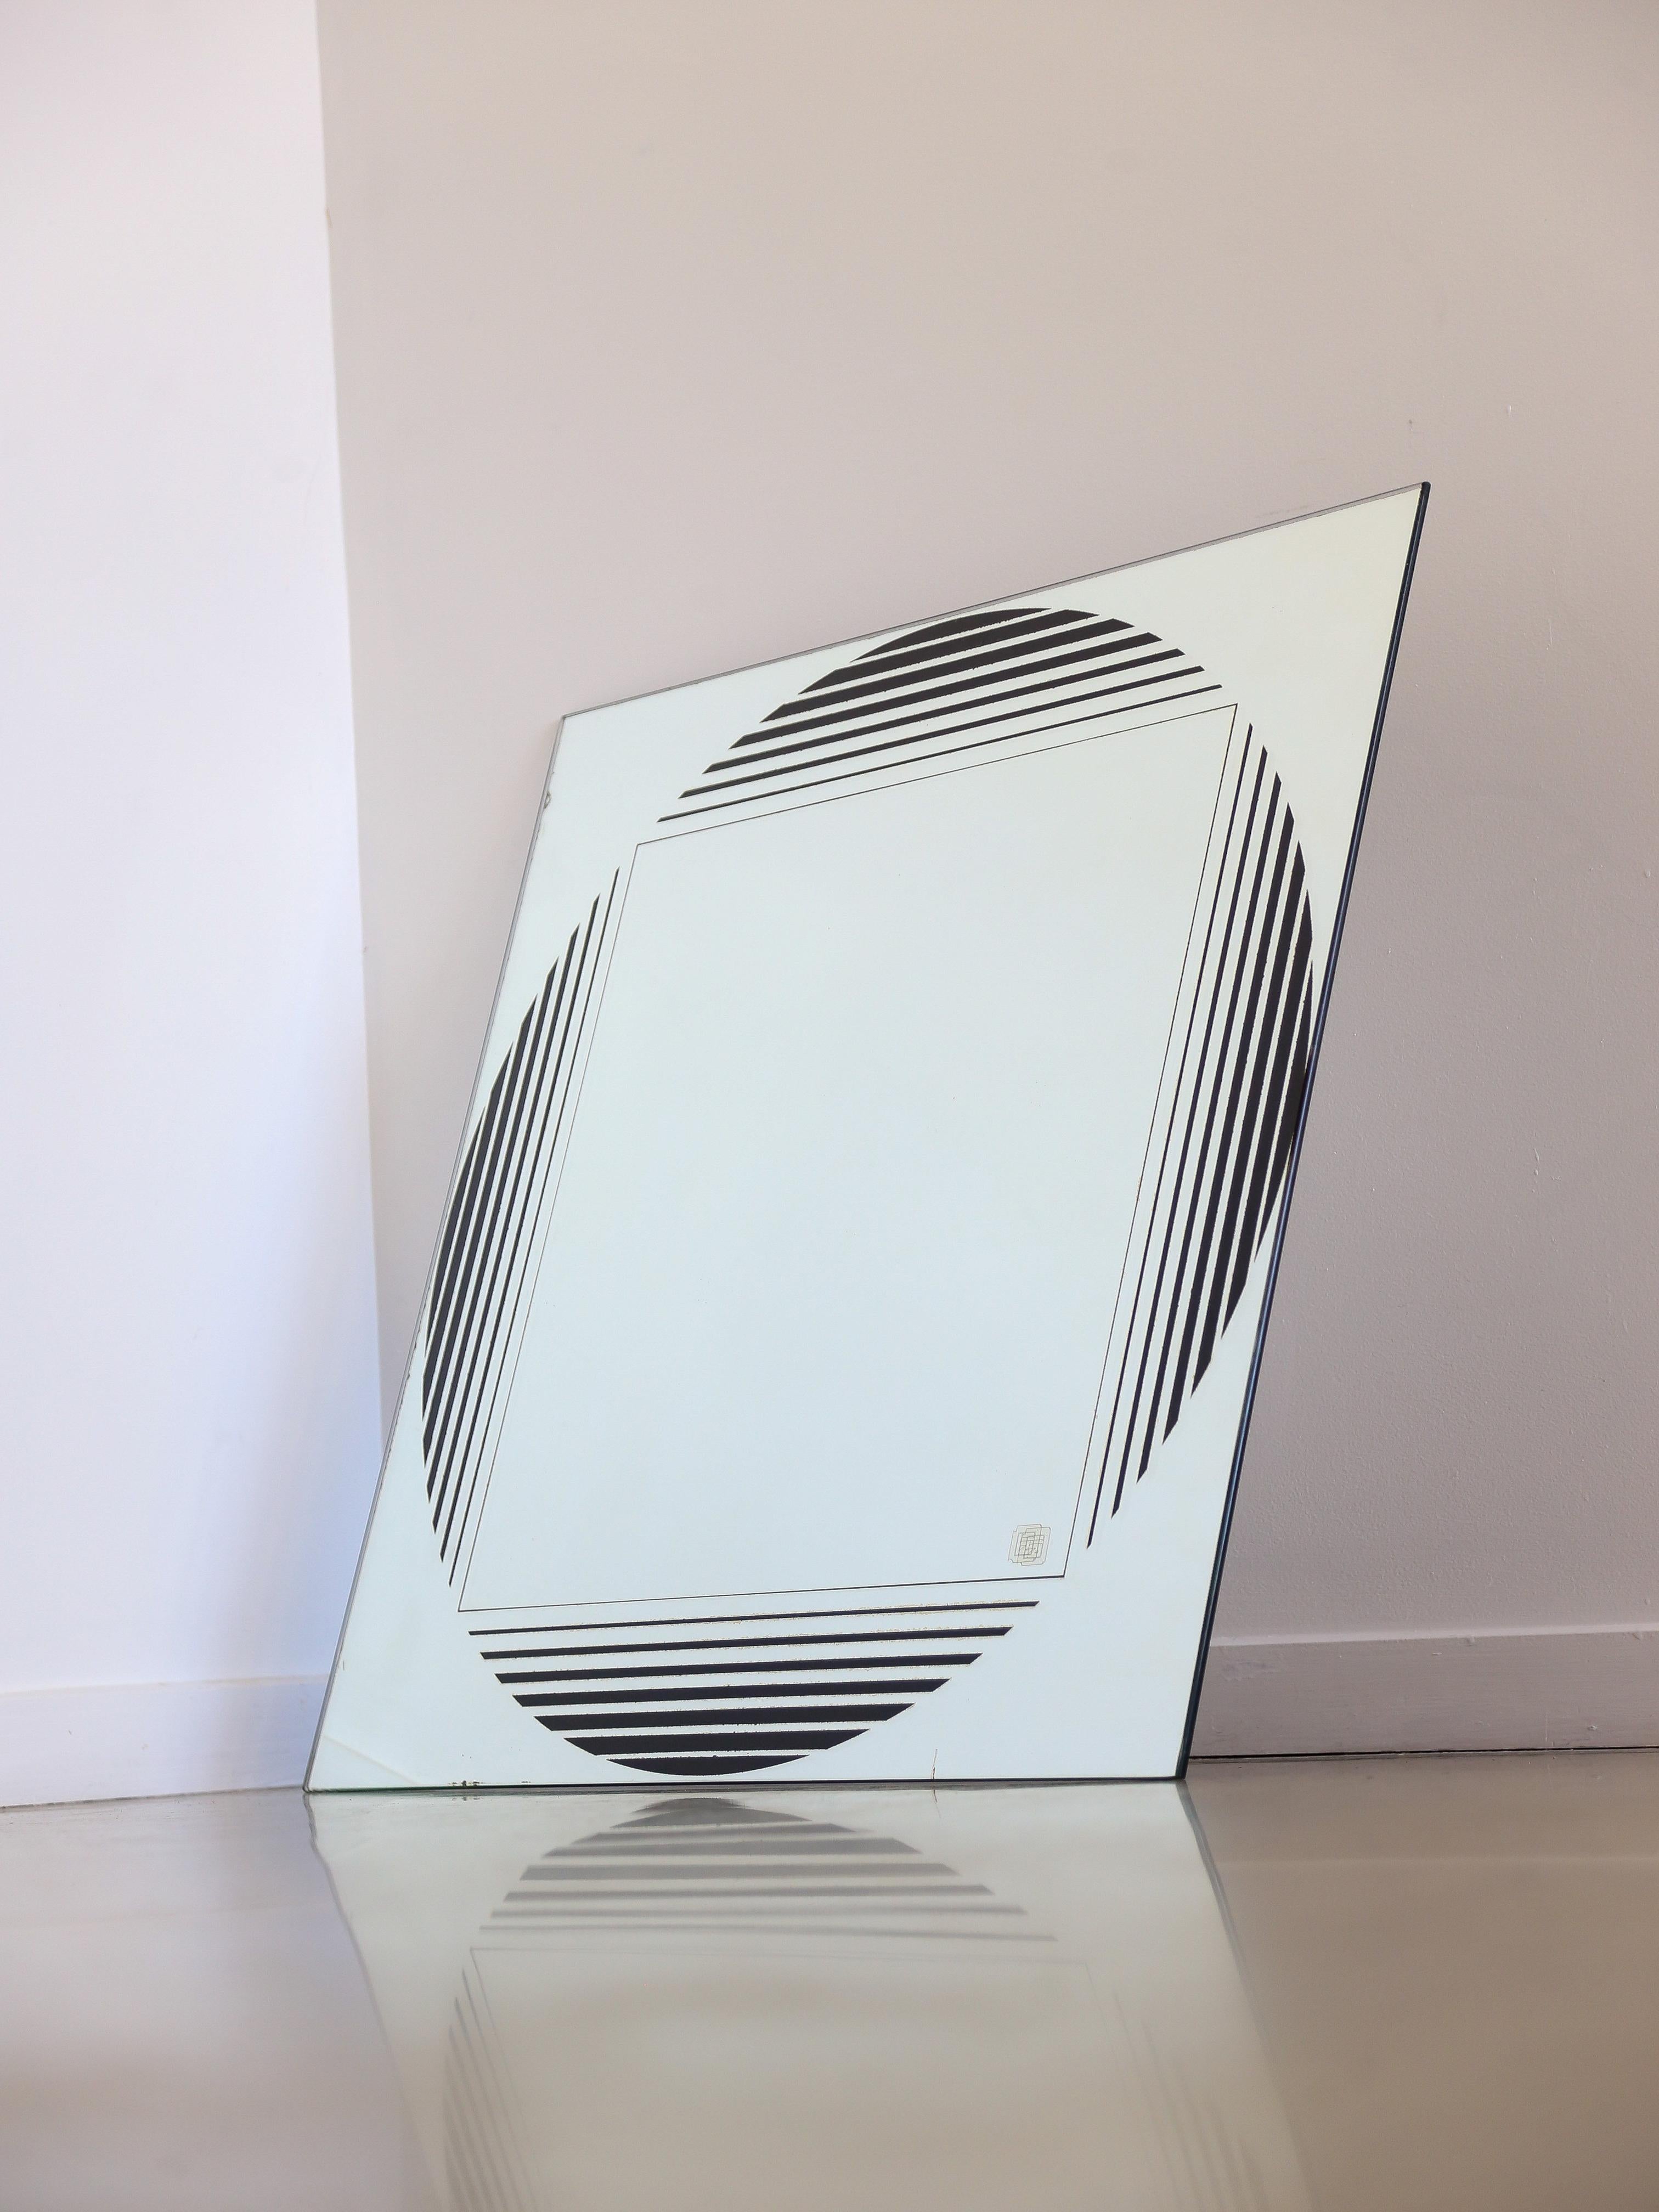 Gianni Celada for Fontana Arte wall mirror. 
Wall mirror by Gianni Celada for Fontana Arte, designed in '70s. The mirror has a screen printed decoration, geometrical black theme.
Published in: L. Falconi, 